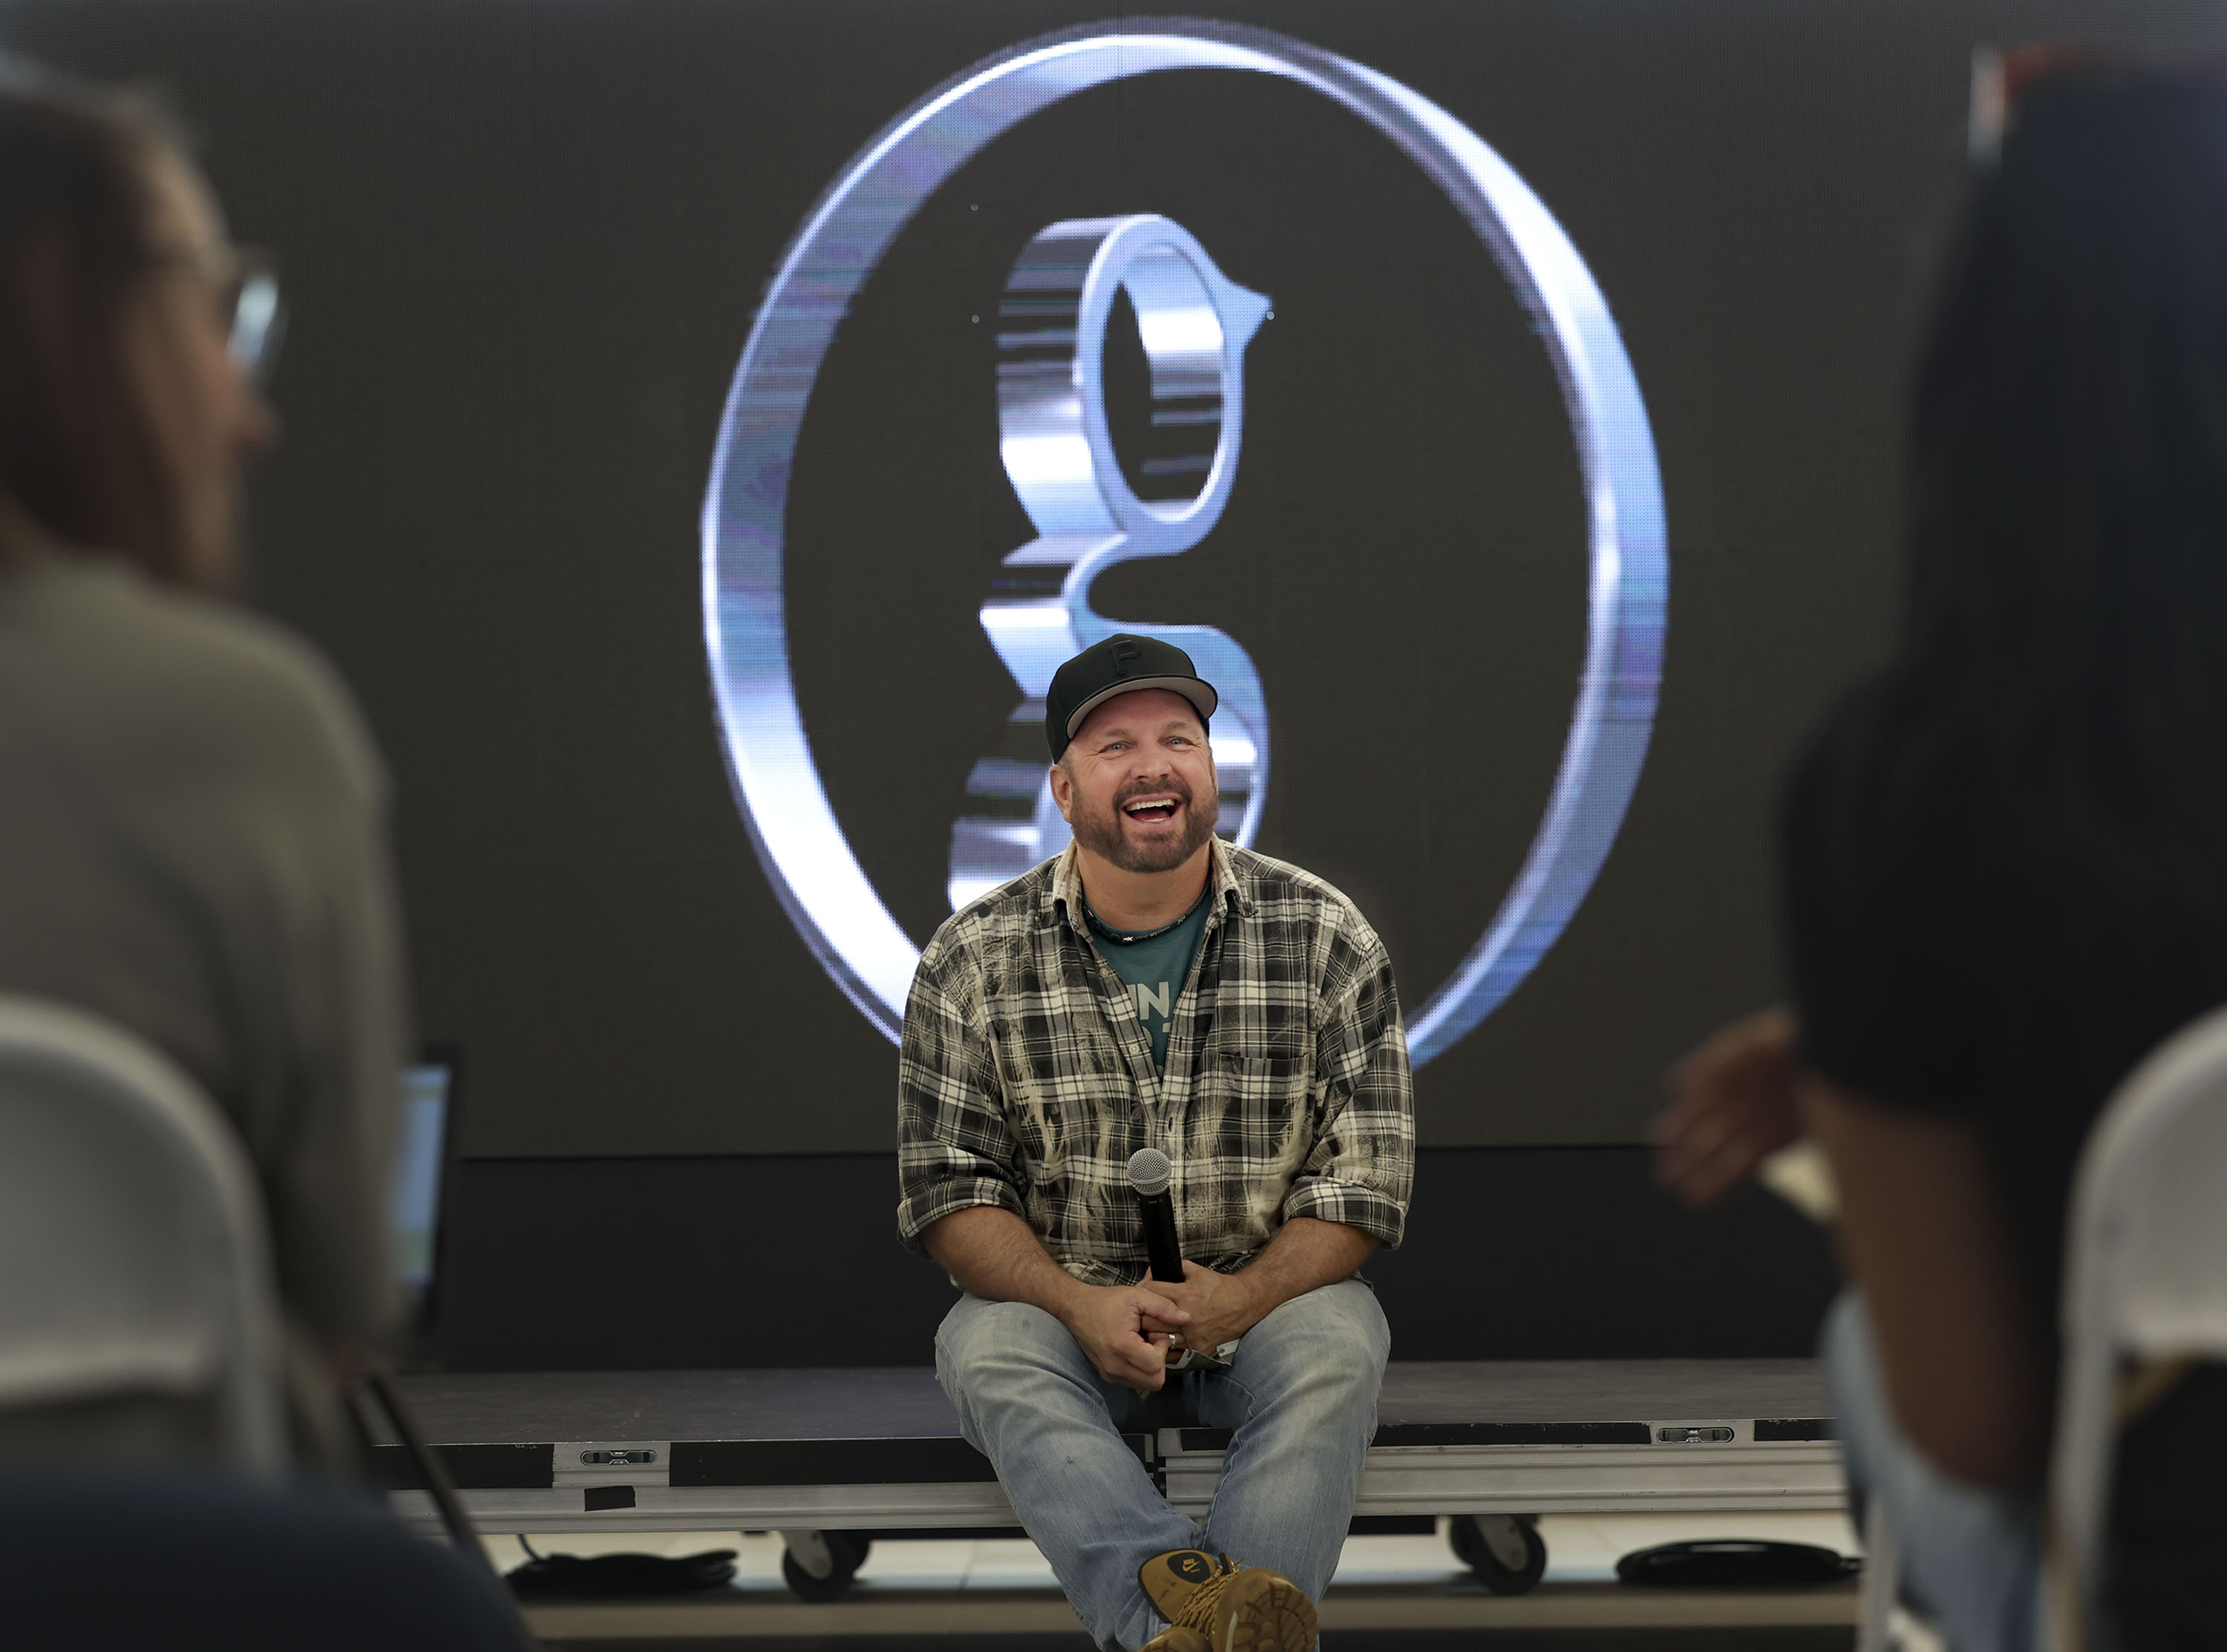 Garth Brooks  GARTH BROOKS ANNOUNCES THE RELEASE OF HIS 14TH STUDIO ALBUM, TIME  TRAVELER, ON HIS UPCOMING 7-DISC BOXED SET, THE LIMITED SERIES